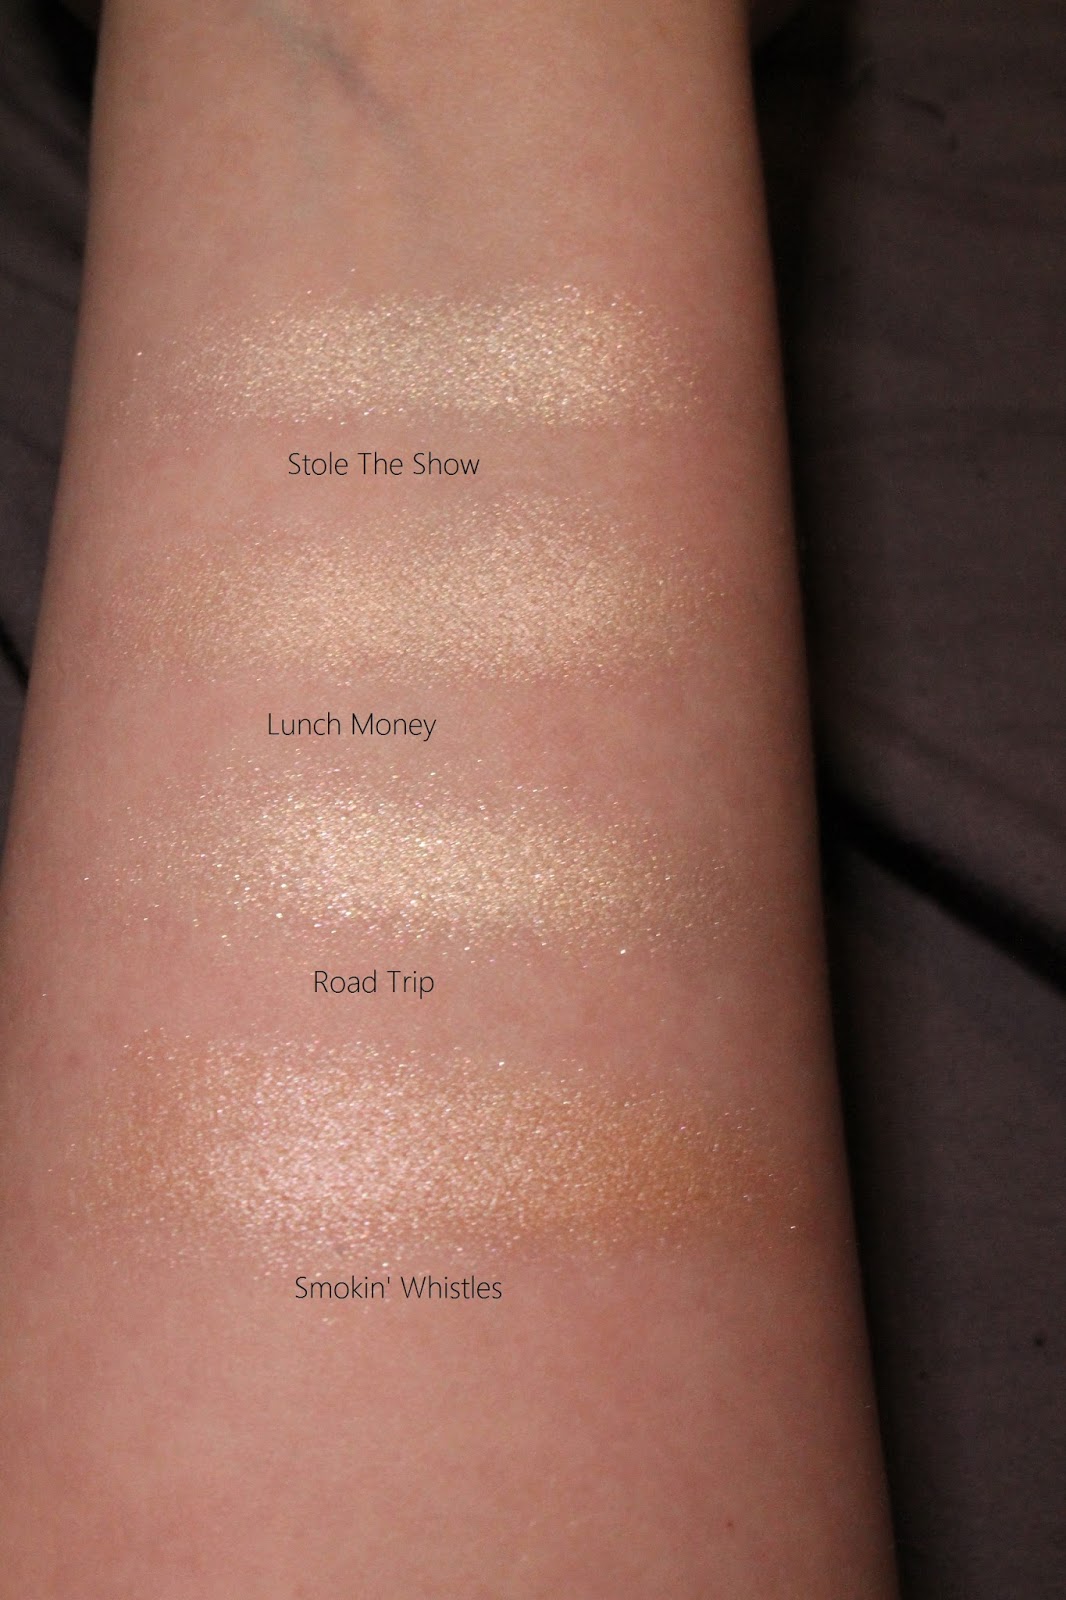 Chameleon Souls Colourpop Highlighter Swatches Colourpop has been running this 'build your own palette' deal on and off for a few weeks now. chameleon souls blogger